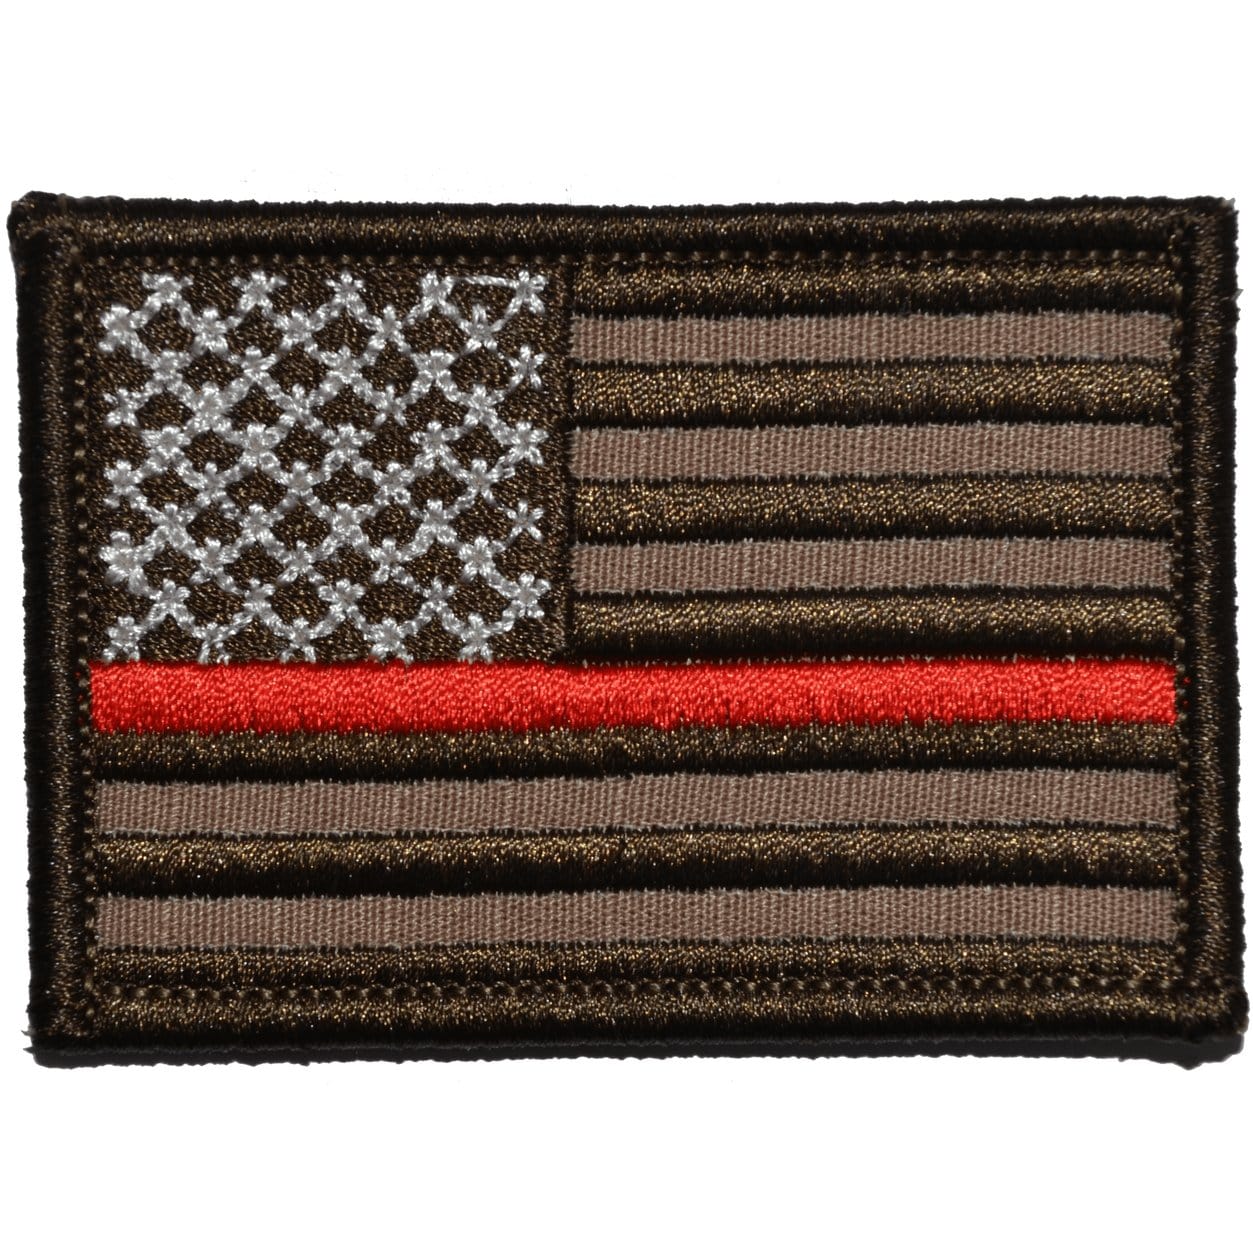 Tactical Gear Junkie Patches Coyote Brown Thin Red Line Firefighter American Flag - 2x3 Hat Patch